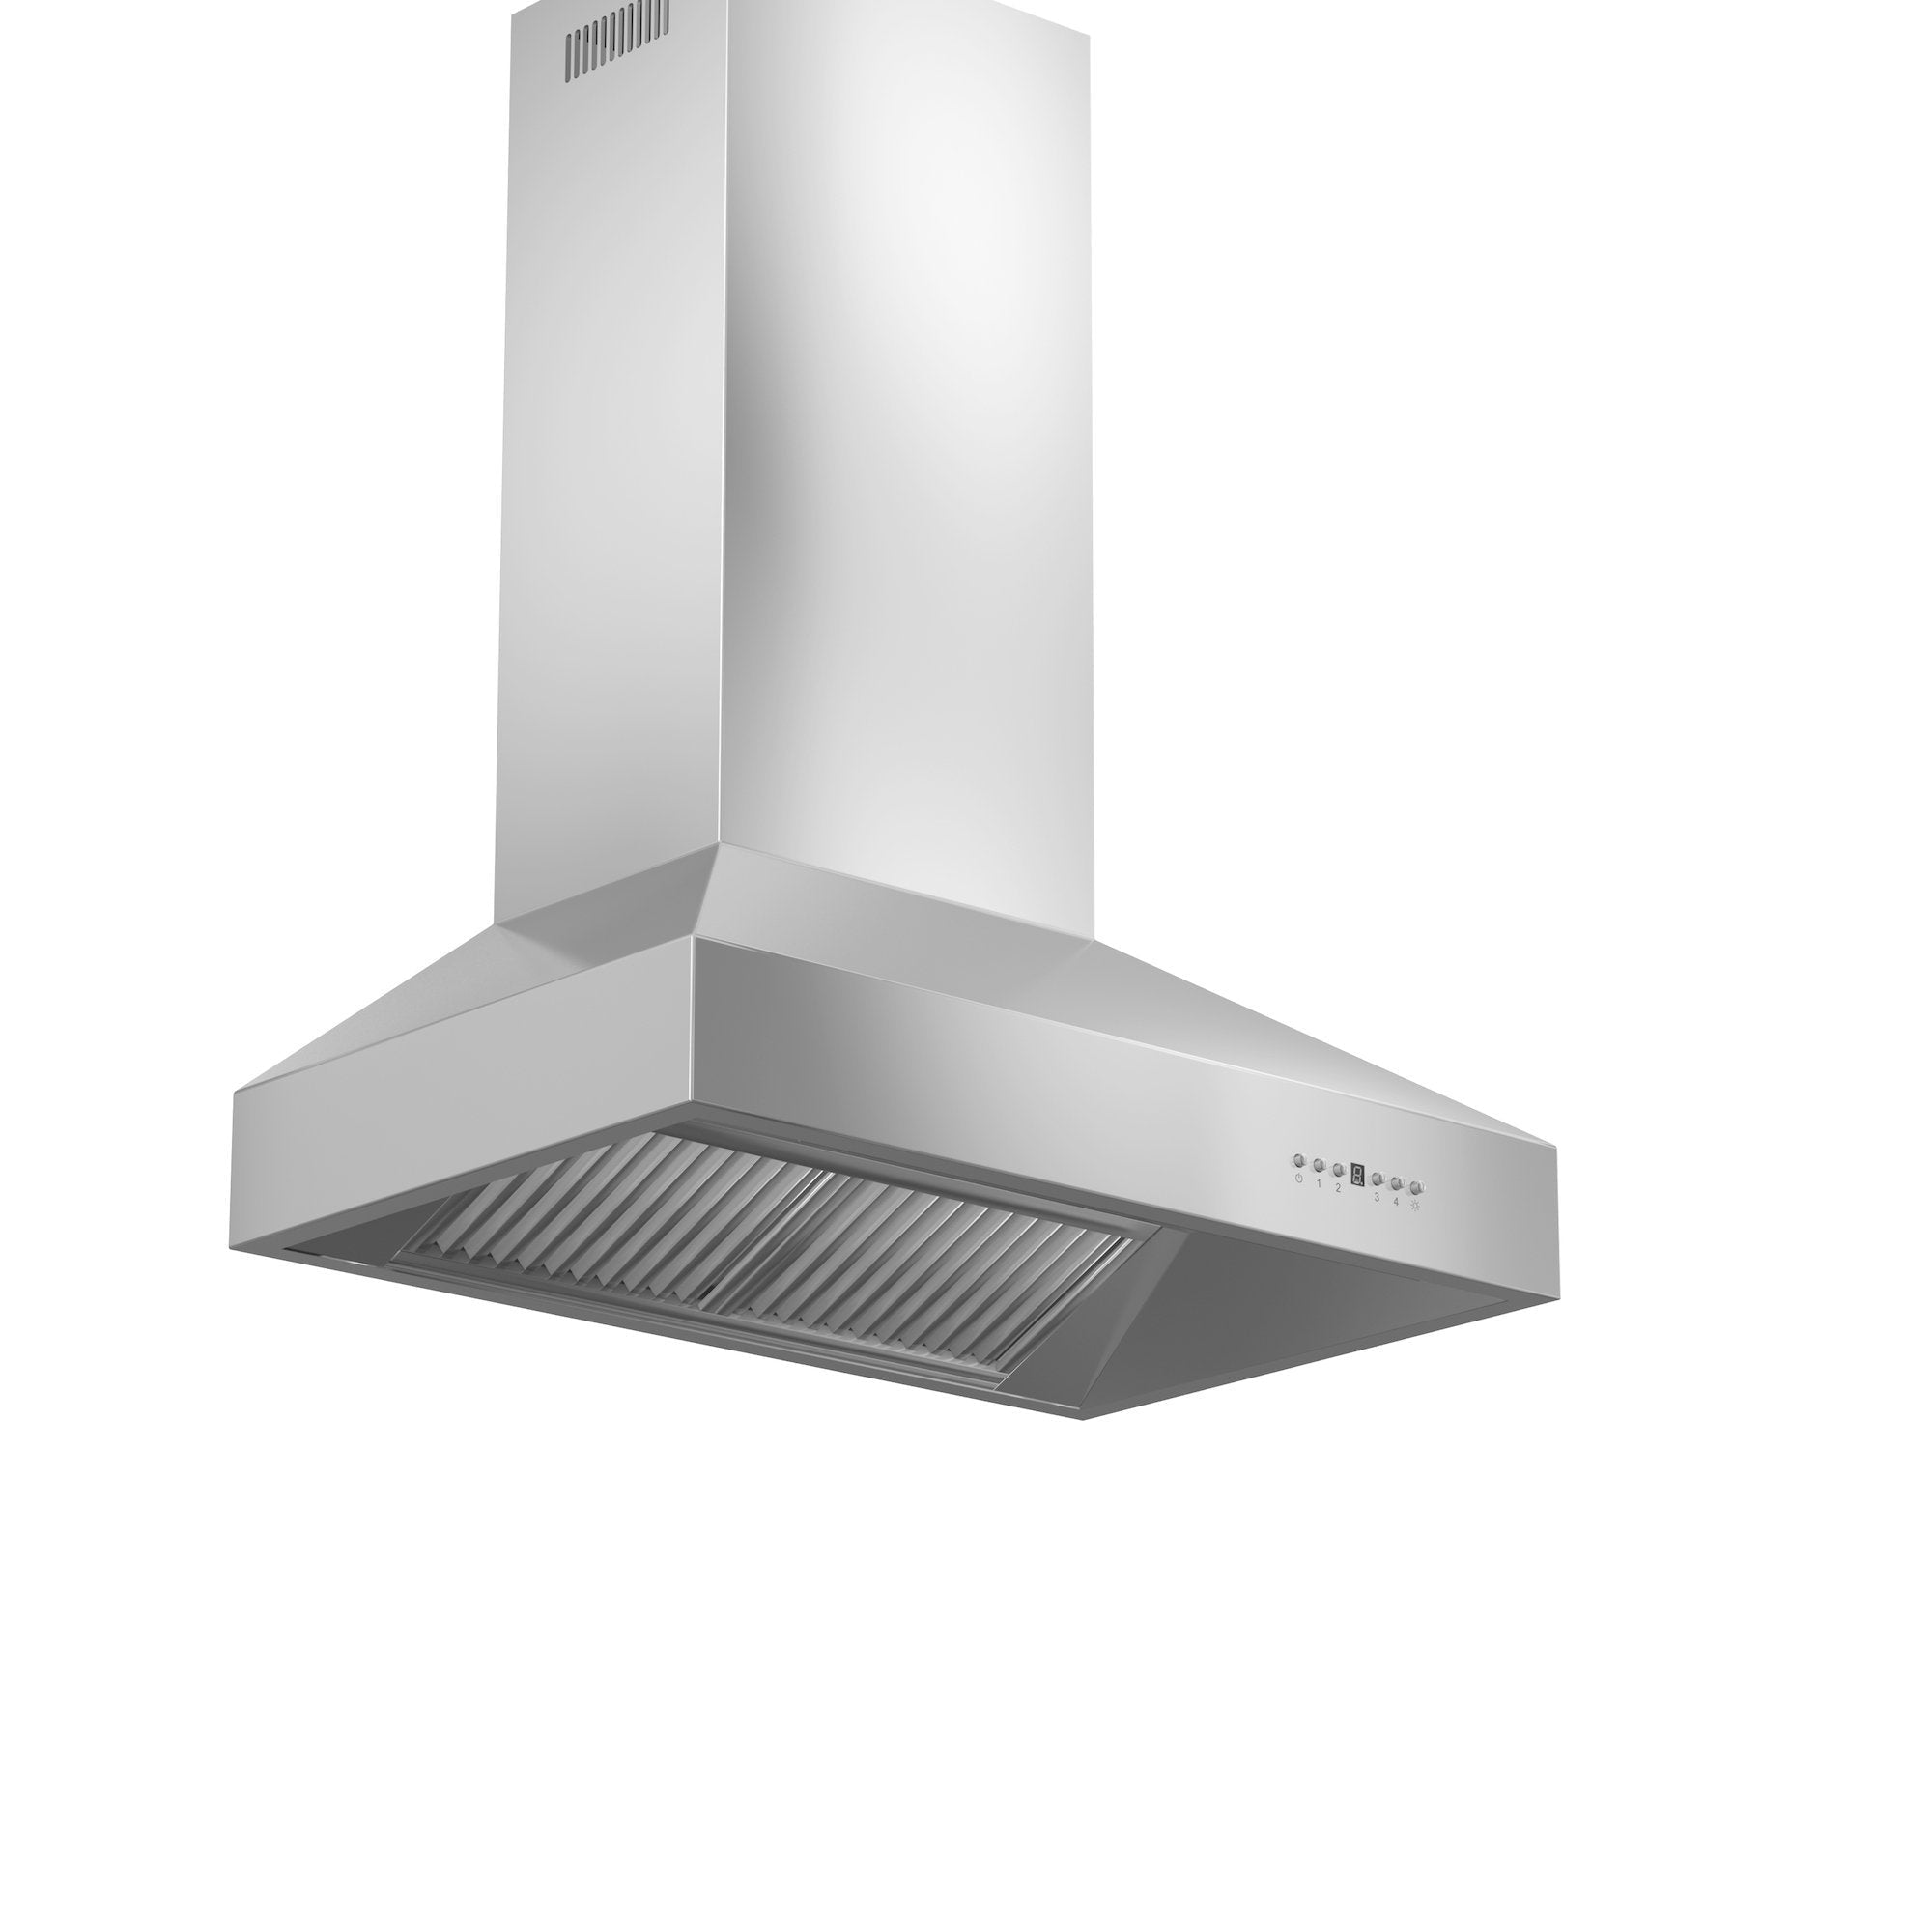 ZLINE Professional Convertible Vent Wall Mount Range Hood in Stainless Steel (697) - New Star Living